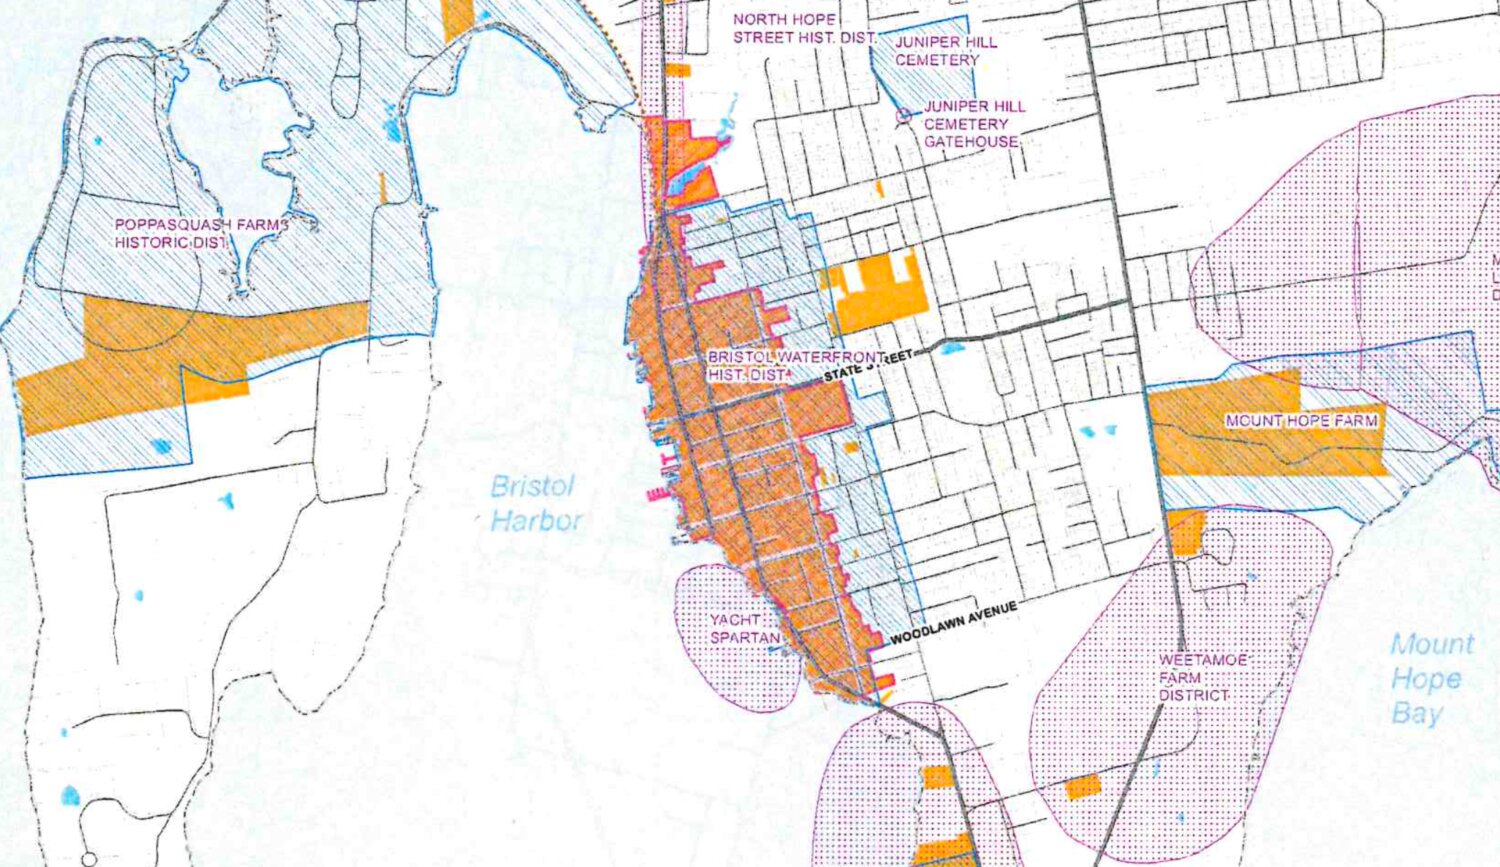 The town’s historic district covers most of downtown Bristol, and other areas throughout town might soon be included among that protected land.